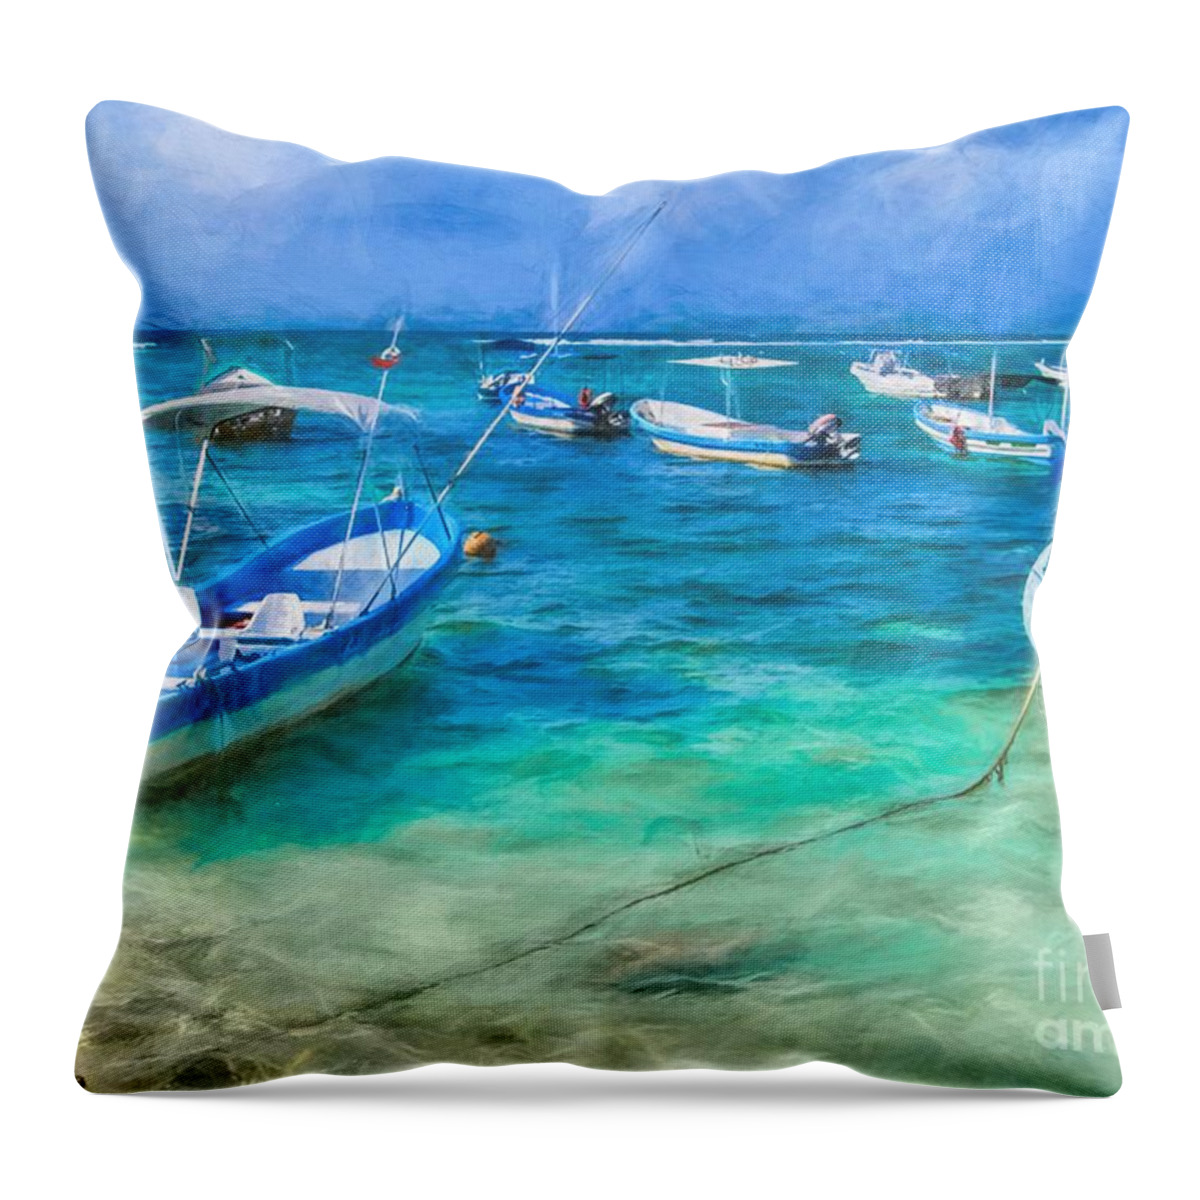 Boats Throw Pillow featuring the photograph Fishing Boats by Peggy Hughes